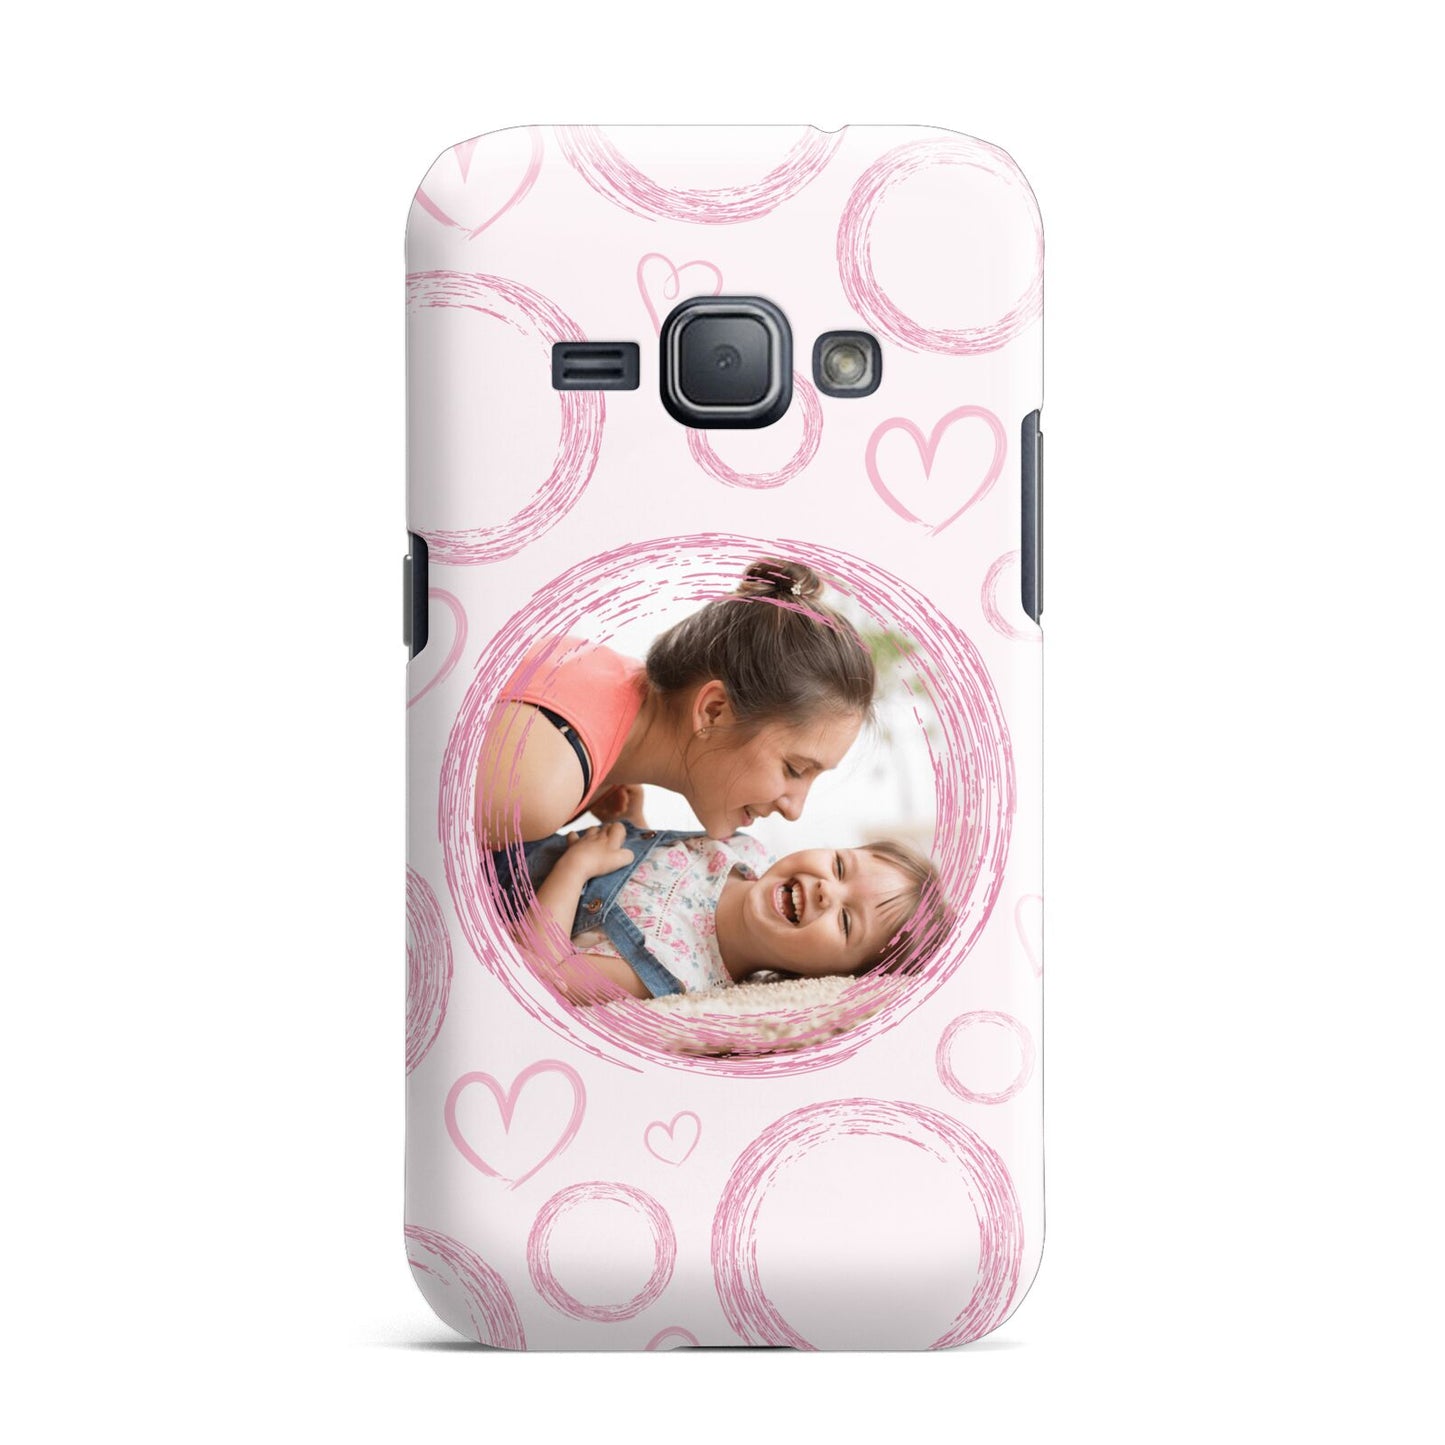 Pink Love Hearts Photo Personalised Samsung Galaxy J1 2016 Case